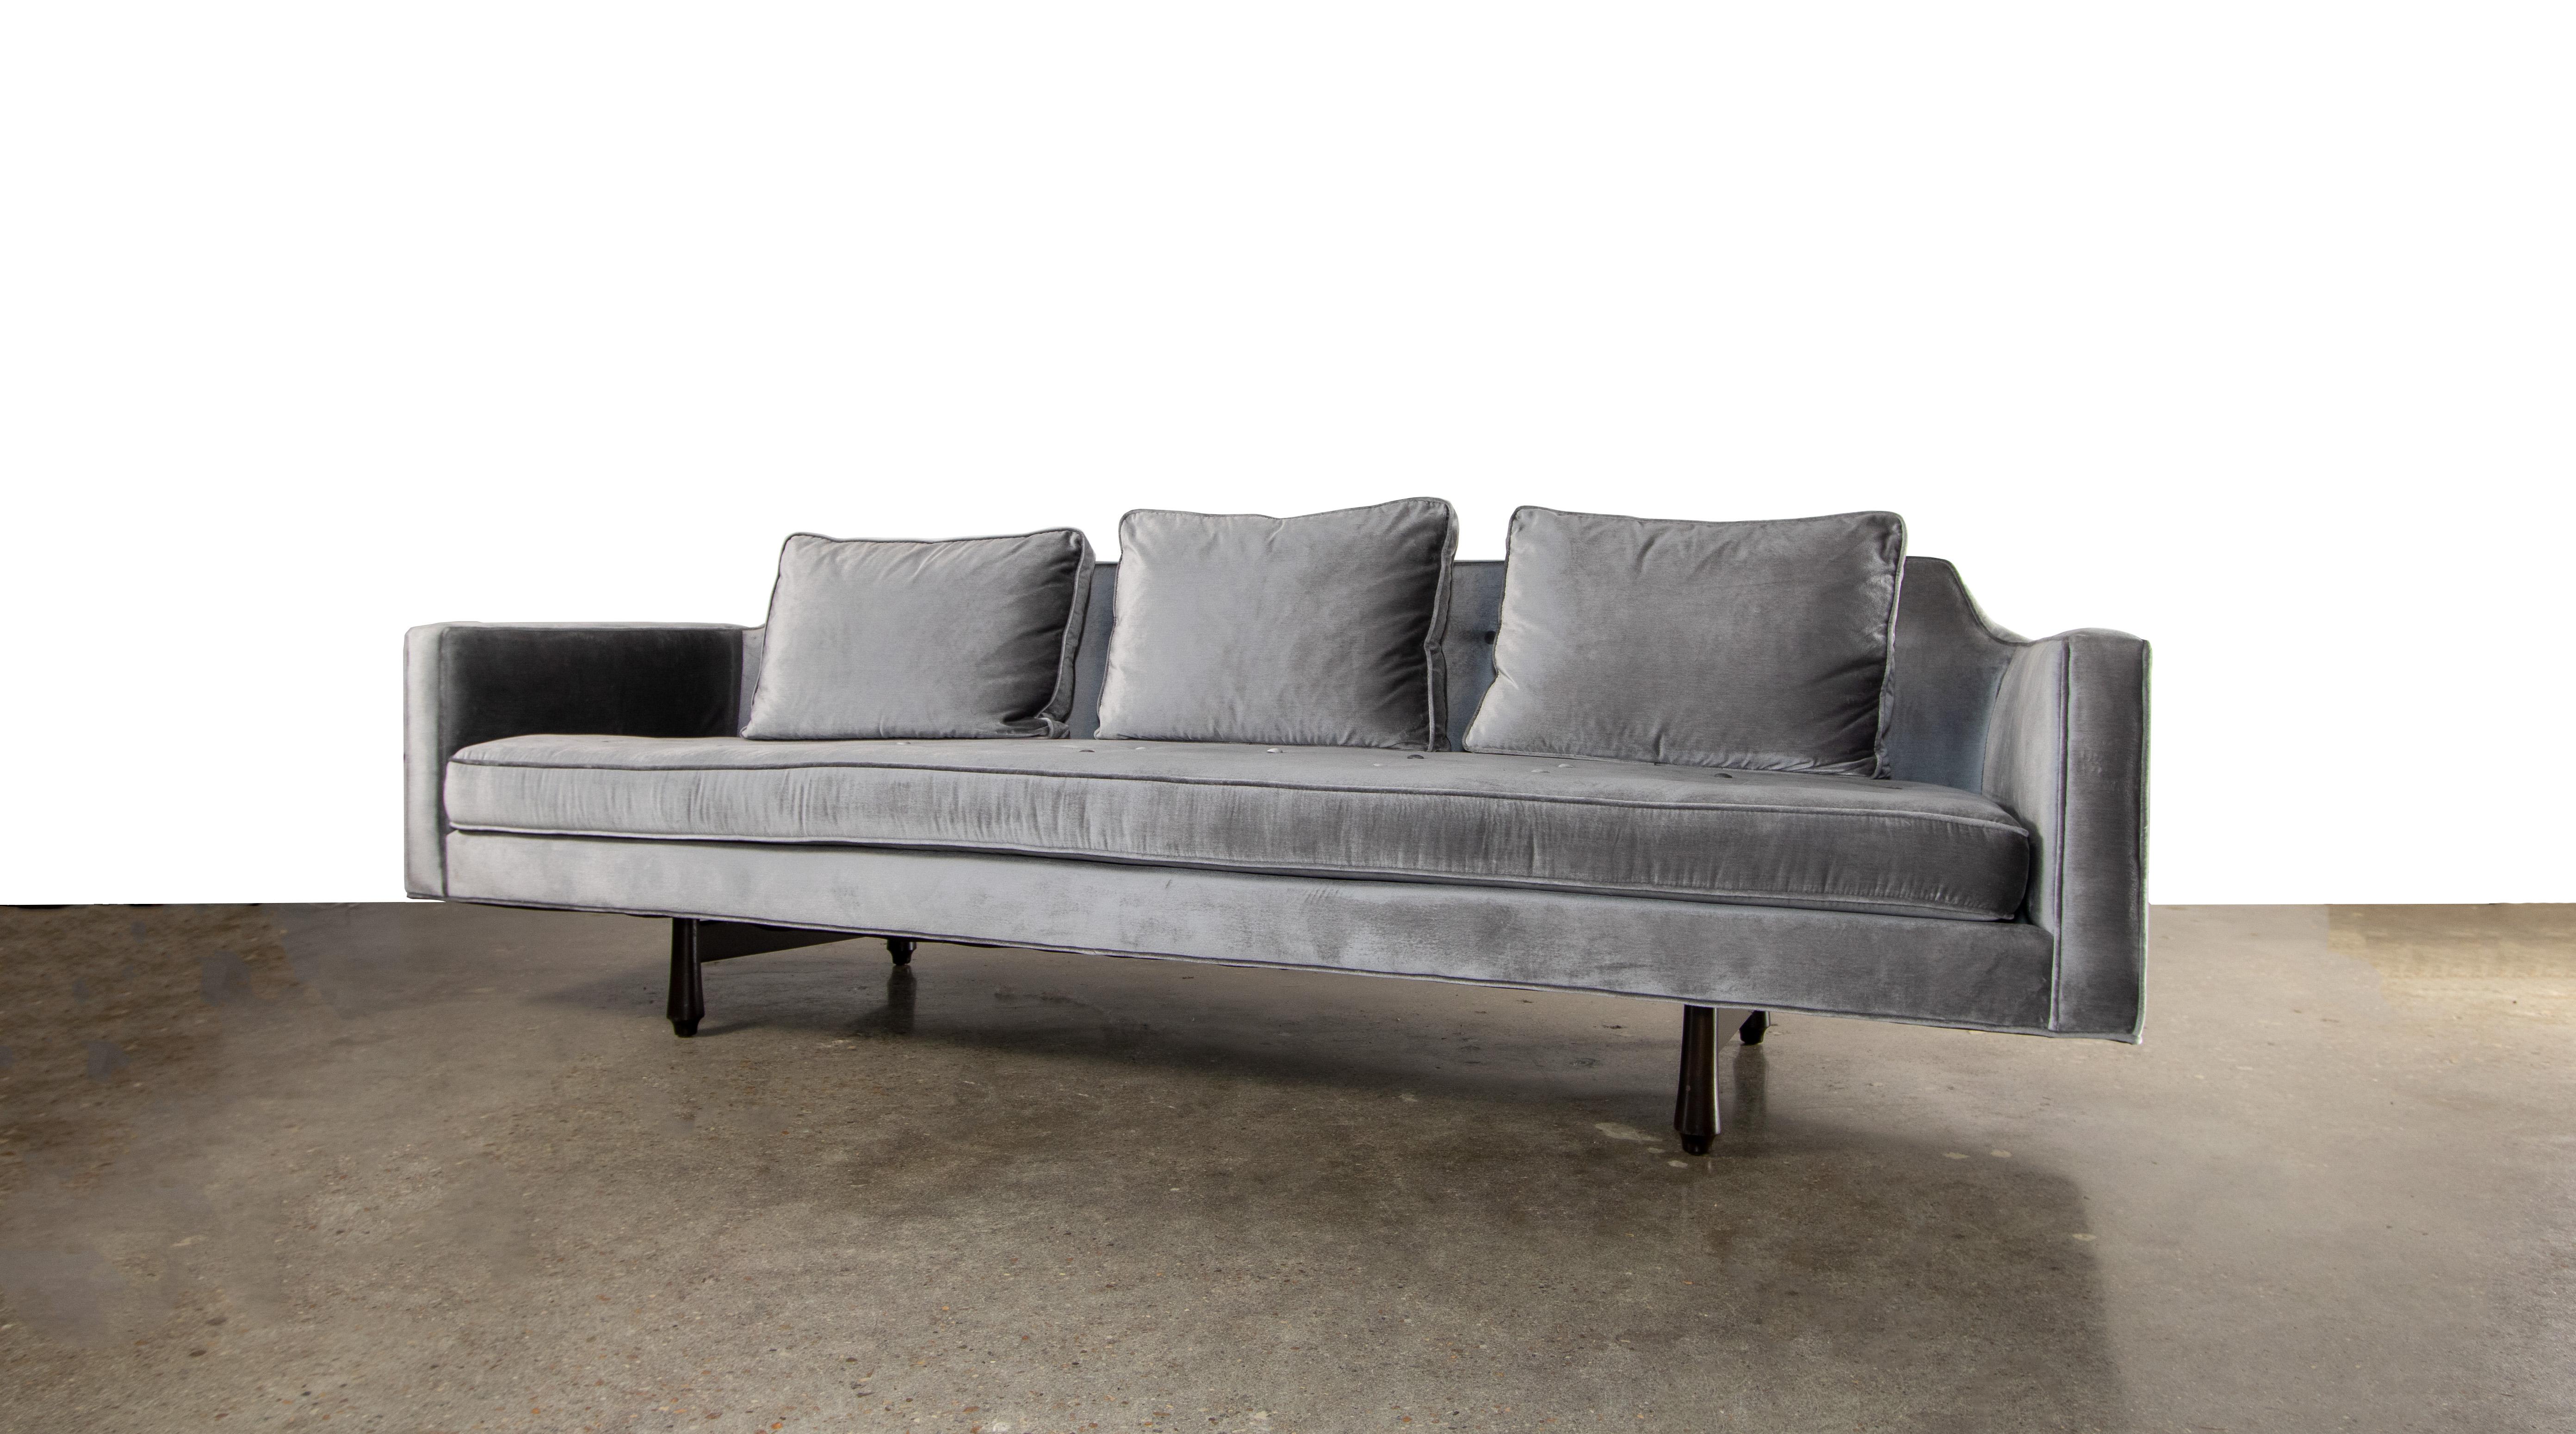 1950s Edward Wormley for Dunbar model 495 sofa in gray velvet and mahogany legs In Excellent Condition For Sale In Virginia Beach, VA